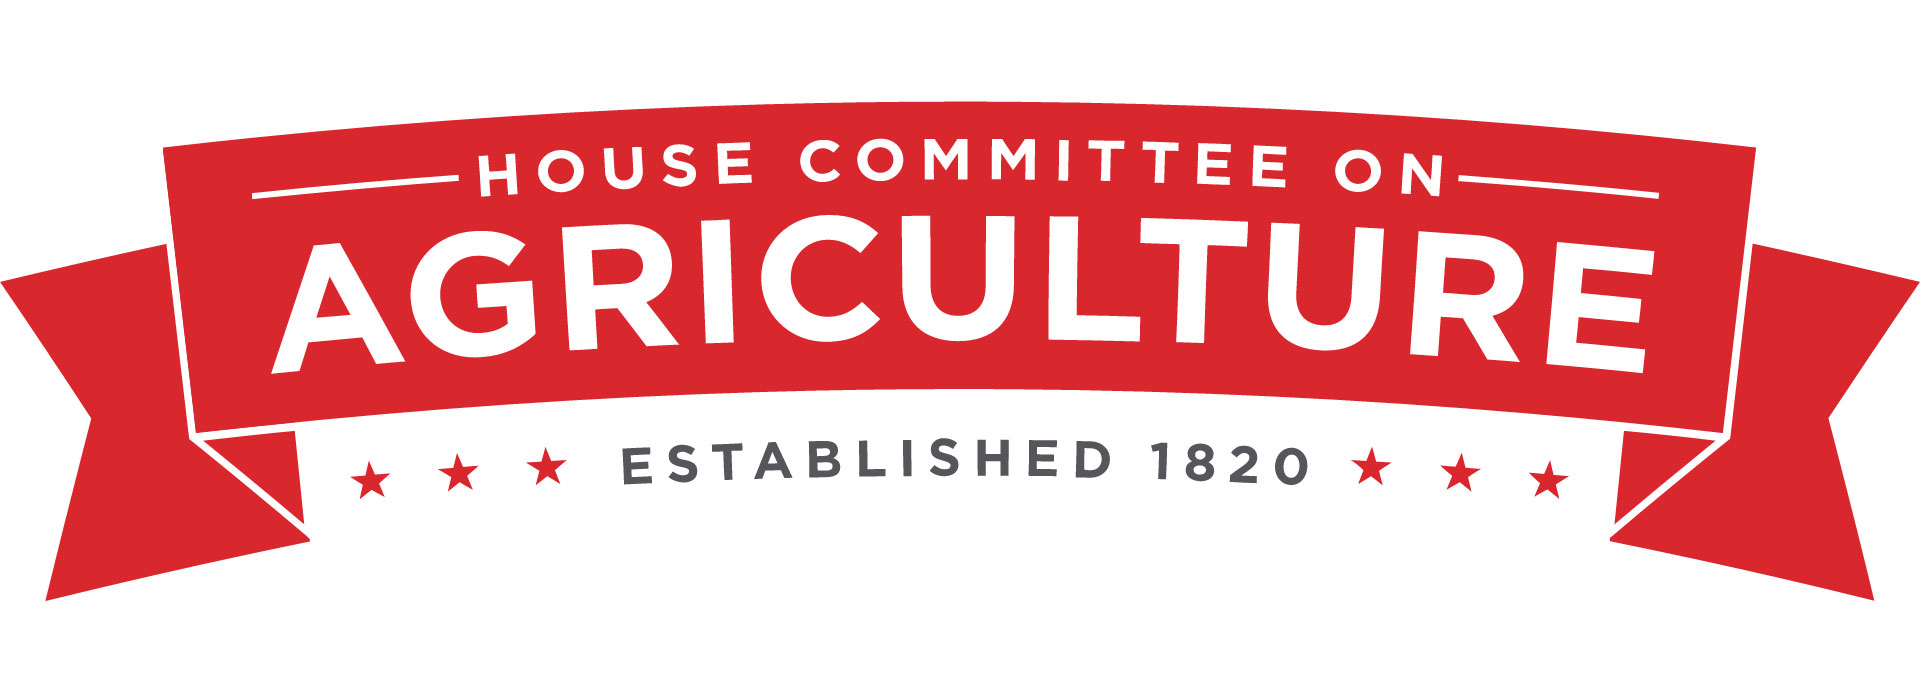 House agriculture committee - swaps trading